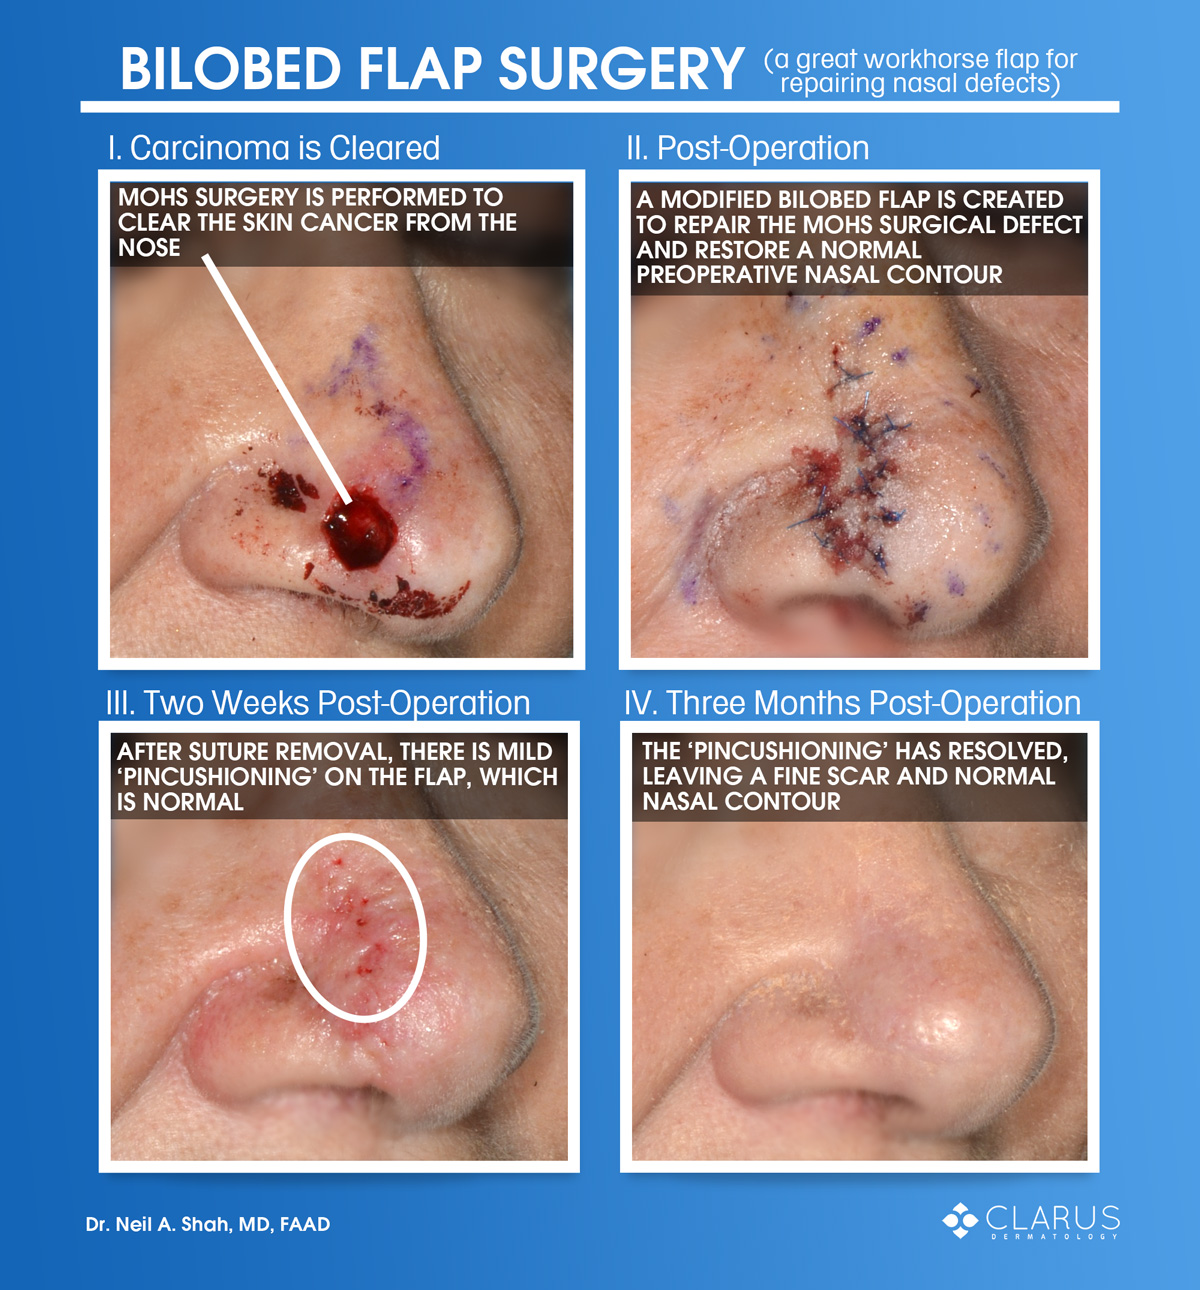 The images here are from a patient of ours that had skin cancer on her nose. Board-certified dermatologist Dr. Neil Shah performed Mohs surgery to clear the carcinoma on the nose (seen in image I.). Dr. Shah then performed a bilobed flap surgery to repair the mid-sized off-center distal nasal defect left behind after the carcinoma was cleared. After the bilobed flap, the normal contour of the nose was reconstructed (seen in image II.).